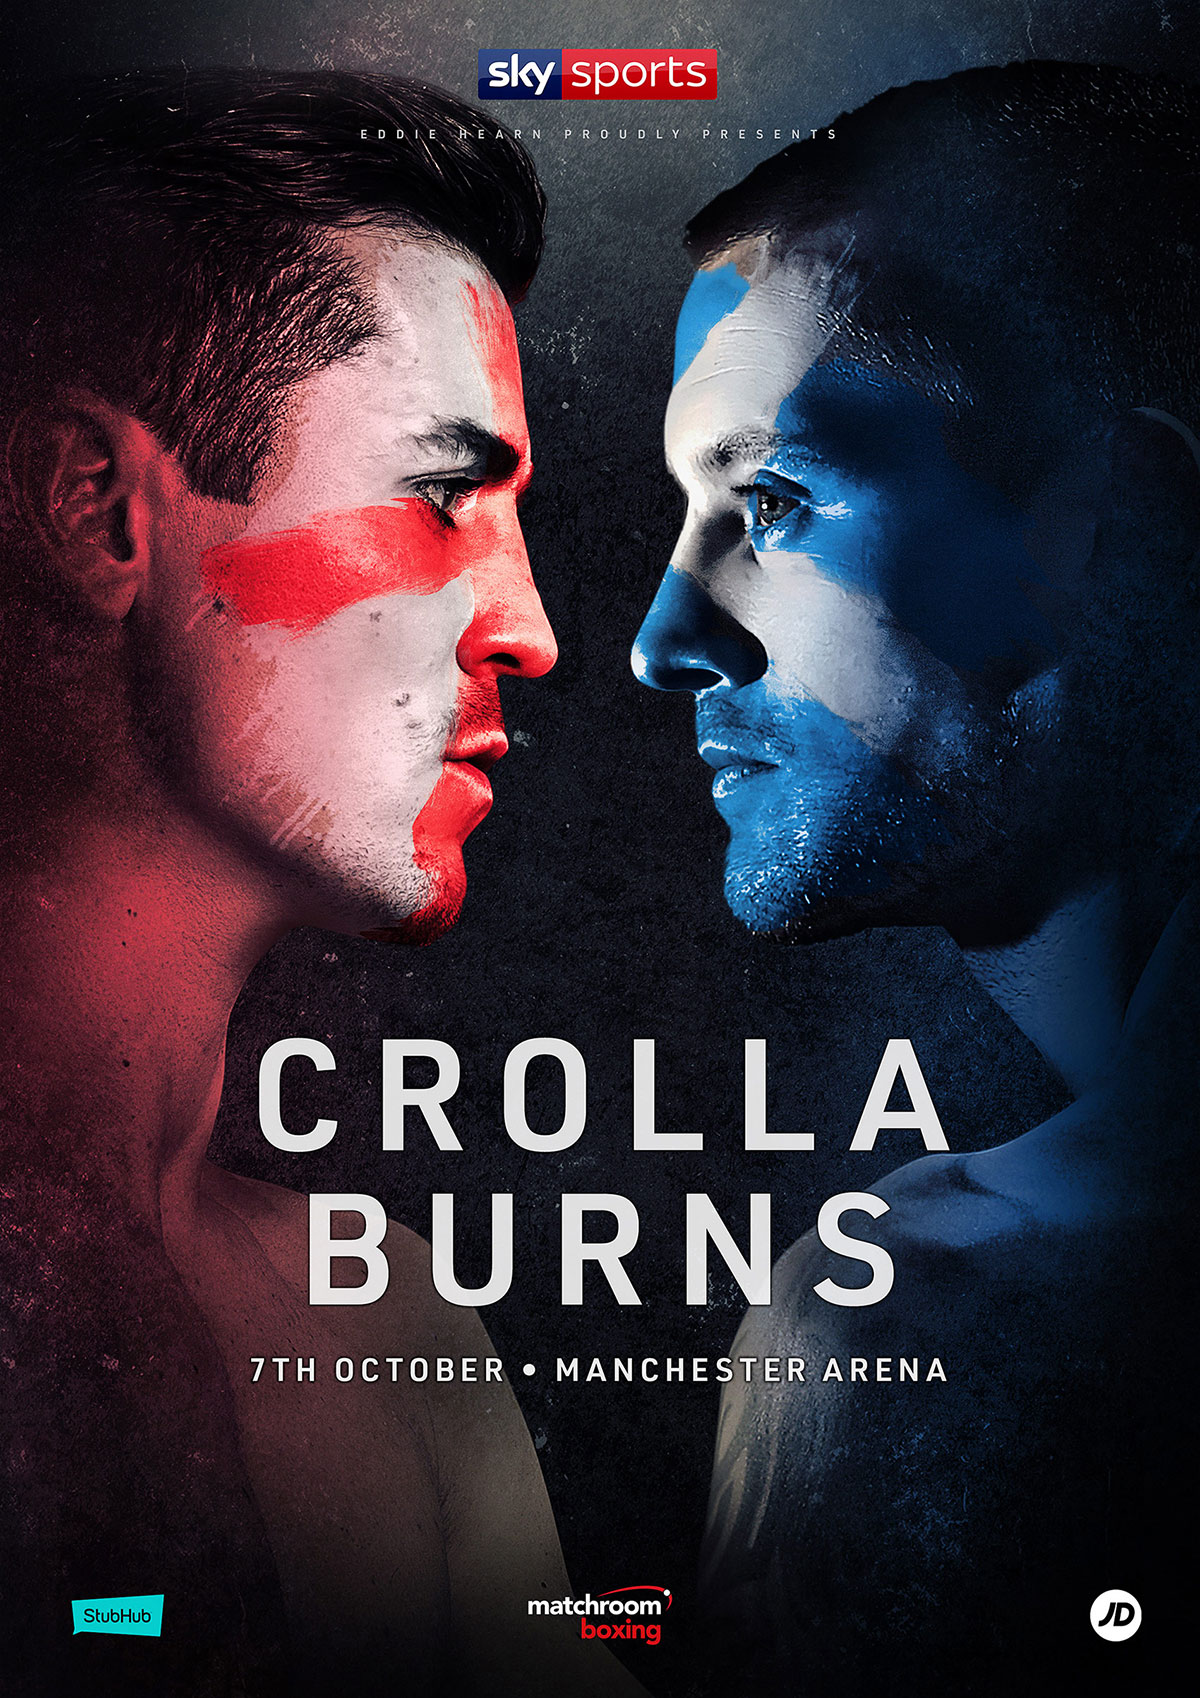 poster for Manchester's Ant Crolla's fight against Scotland's Ricky Burns